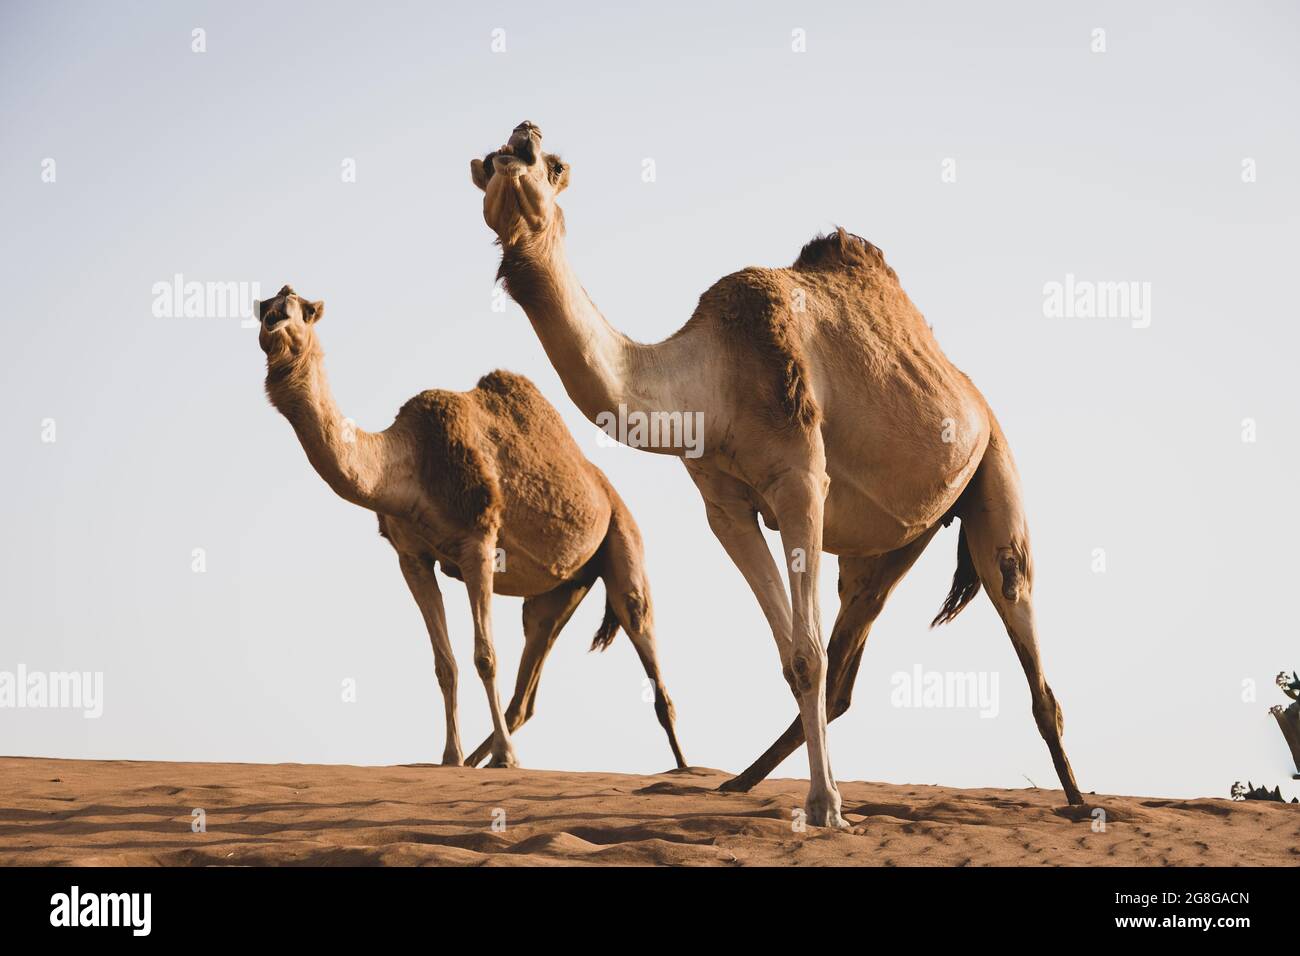 Two dromedary camels (Camelus dromedarius) standing in the same way at the top of sand dune in the desert. Stock Photo